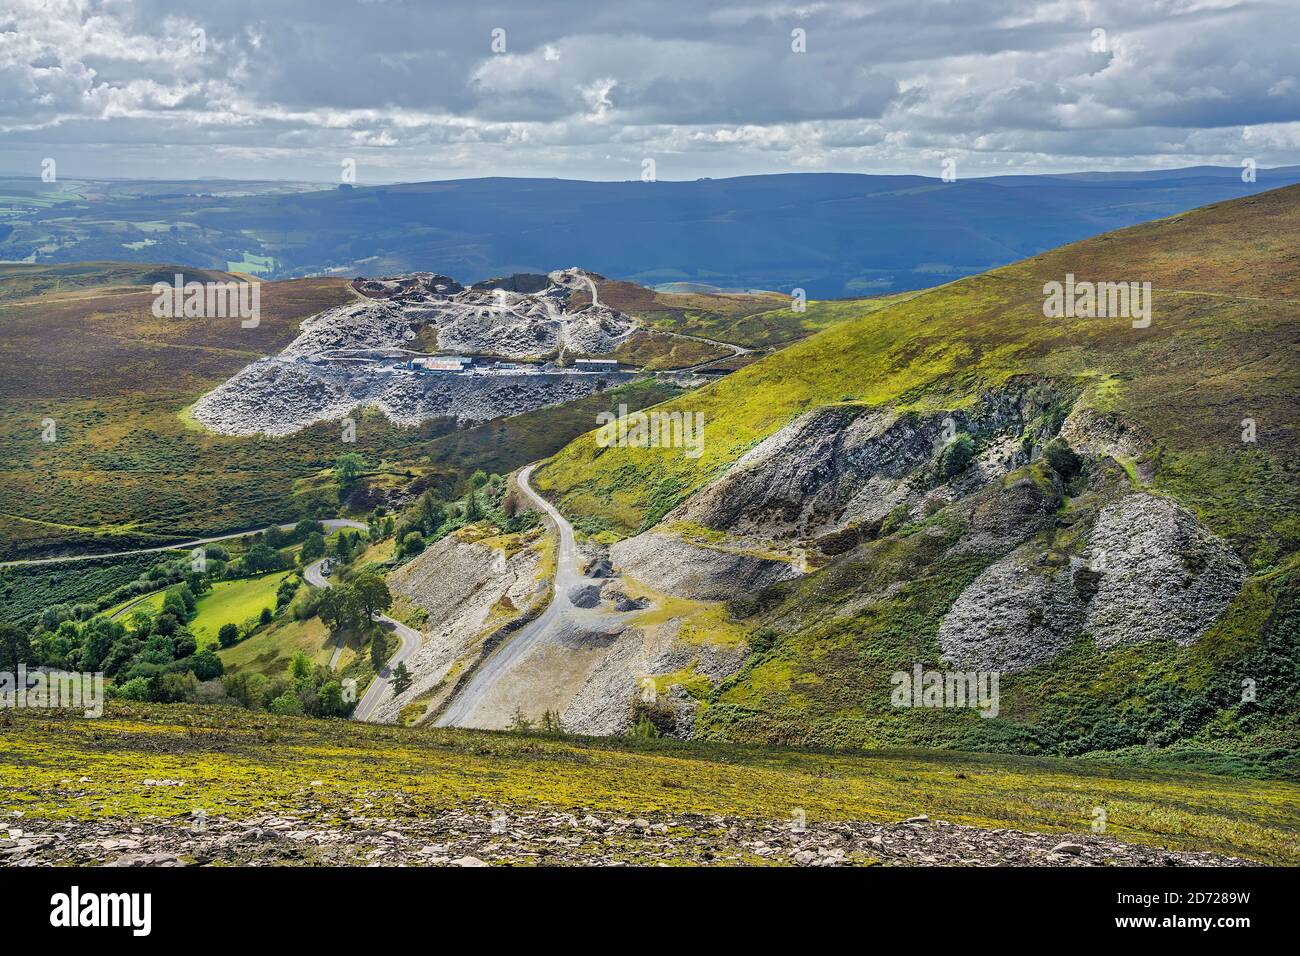 Berwyn Slate quarry by the Horseshoe Pass viewed from Llantysilio Mountain looking south North Wales UK September 2019 0699 Stock Photo